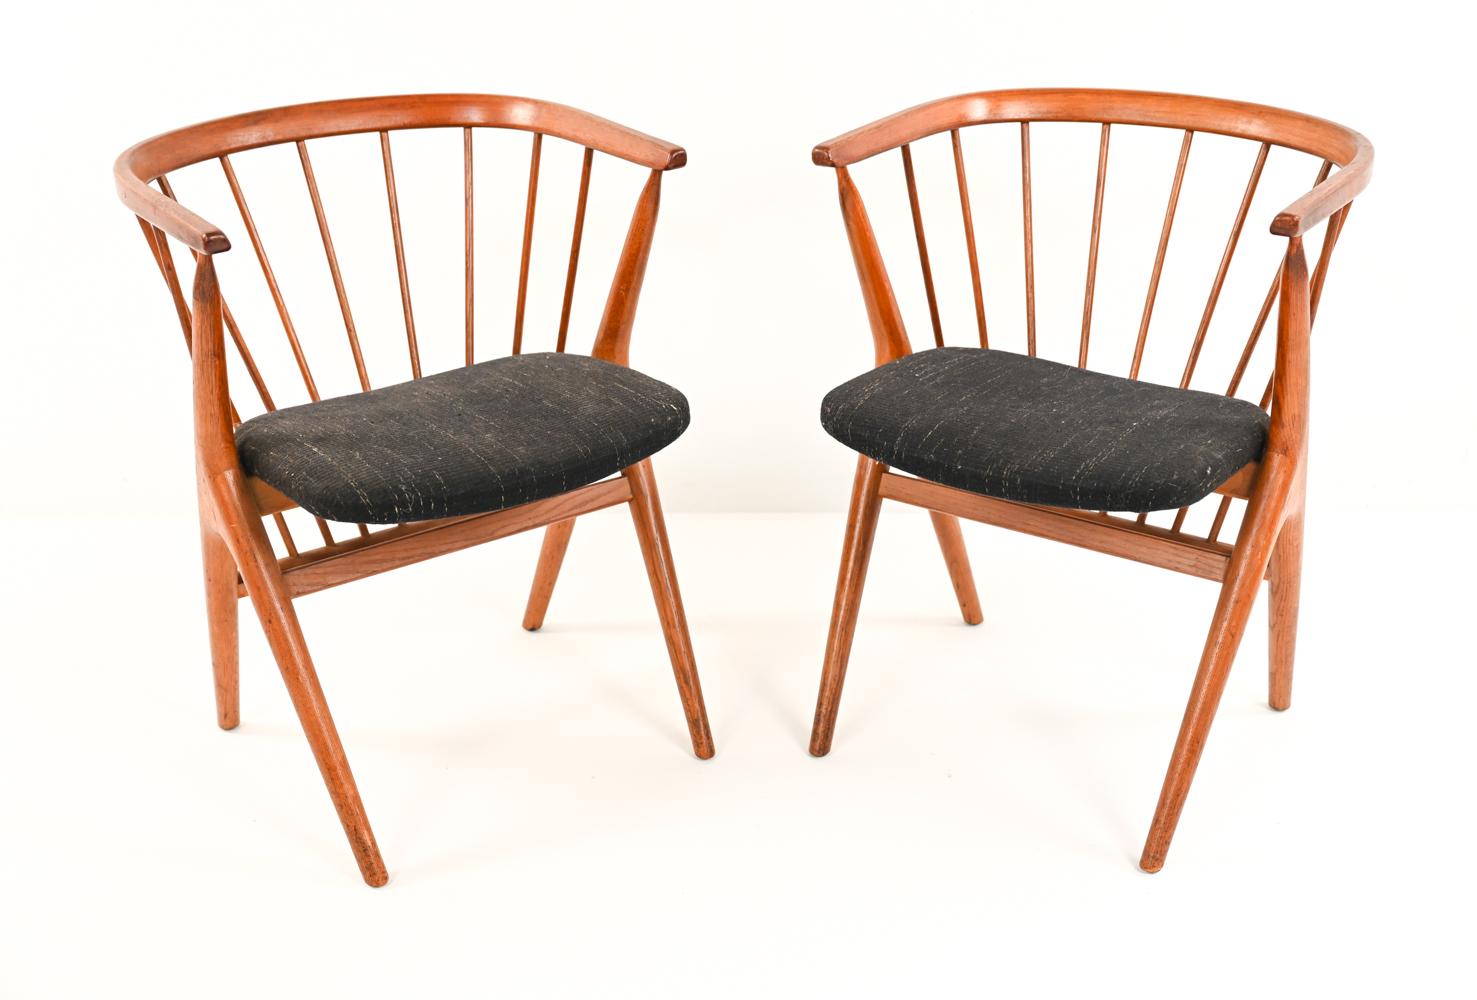 '6' Helge Sibast for Sibast No. 8 Teak Dining Chairs 7